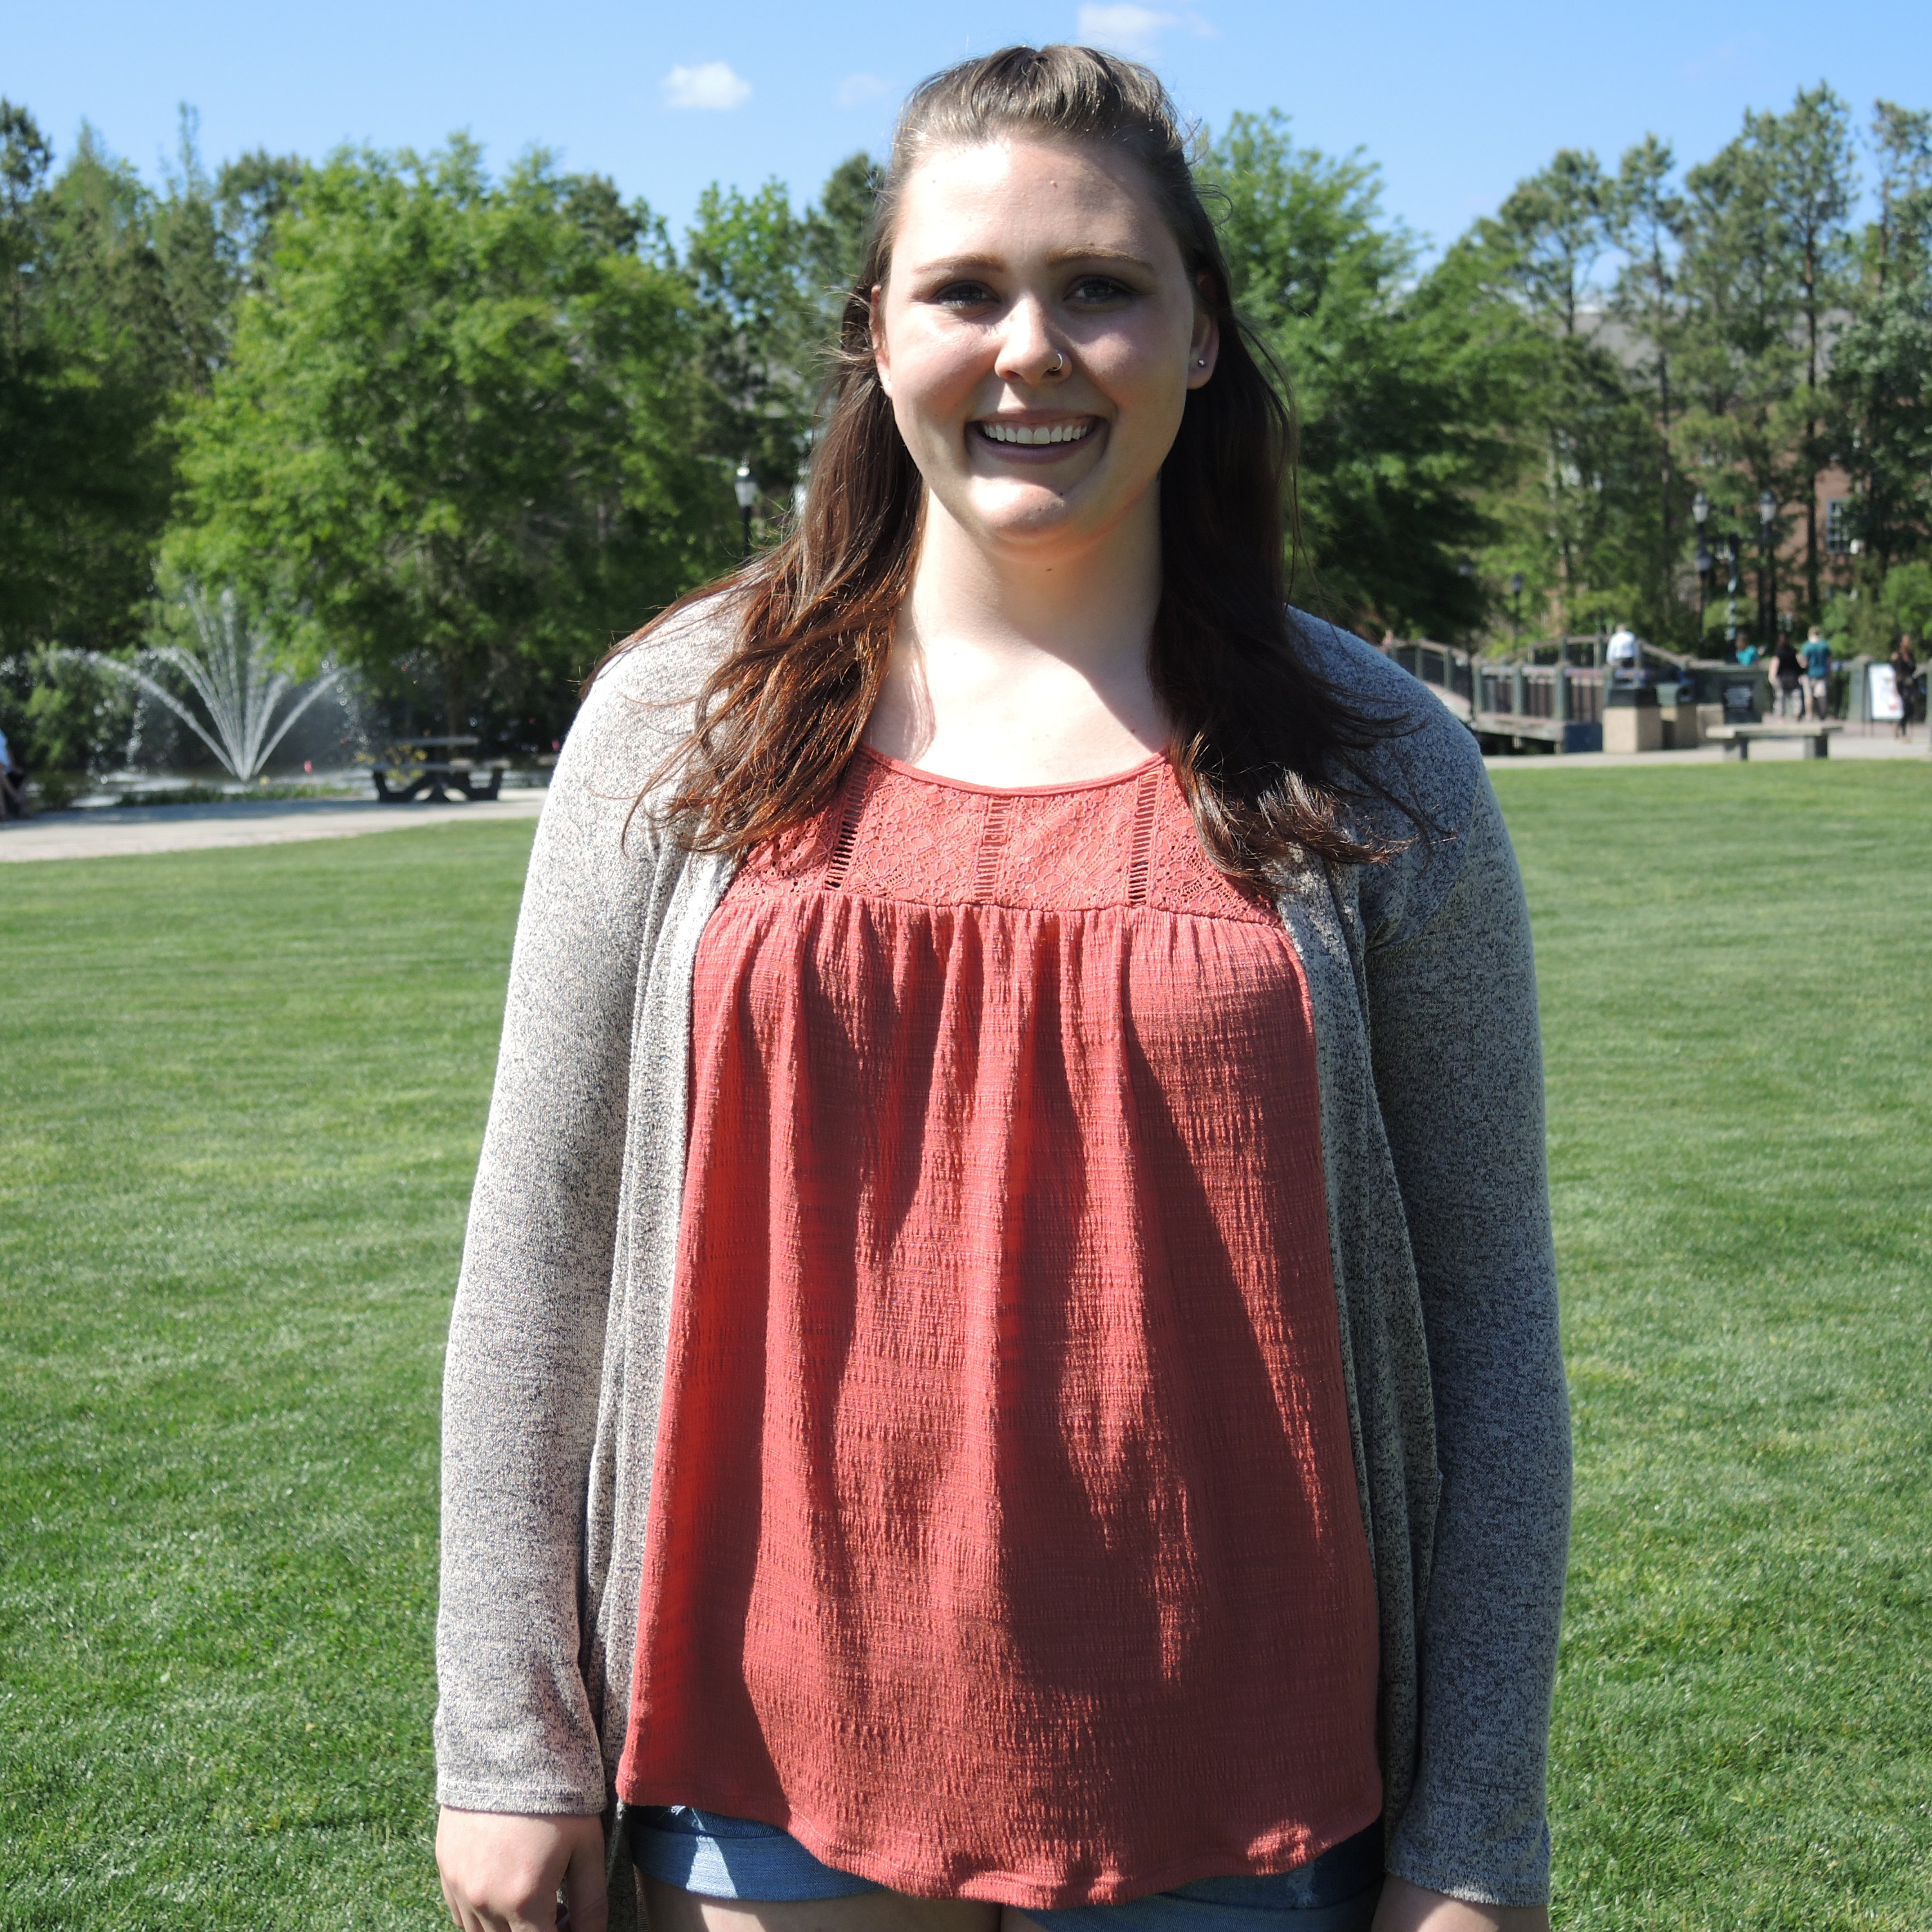 Kyla went on several campus tours at other universities before deciding on CCU.